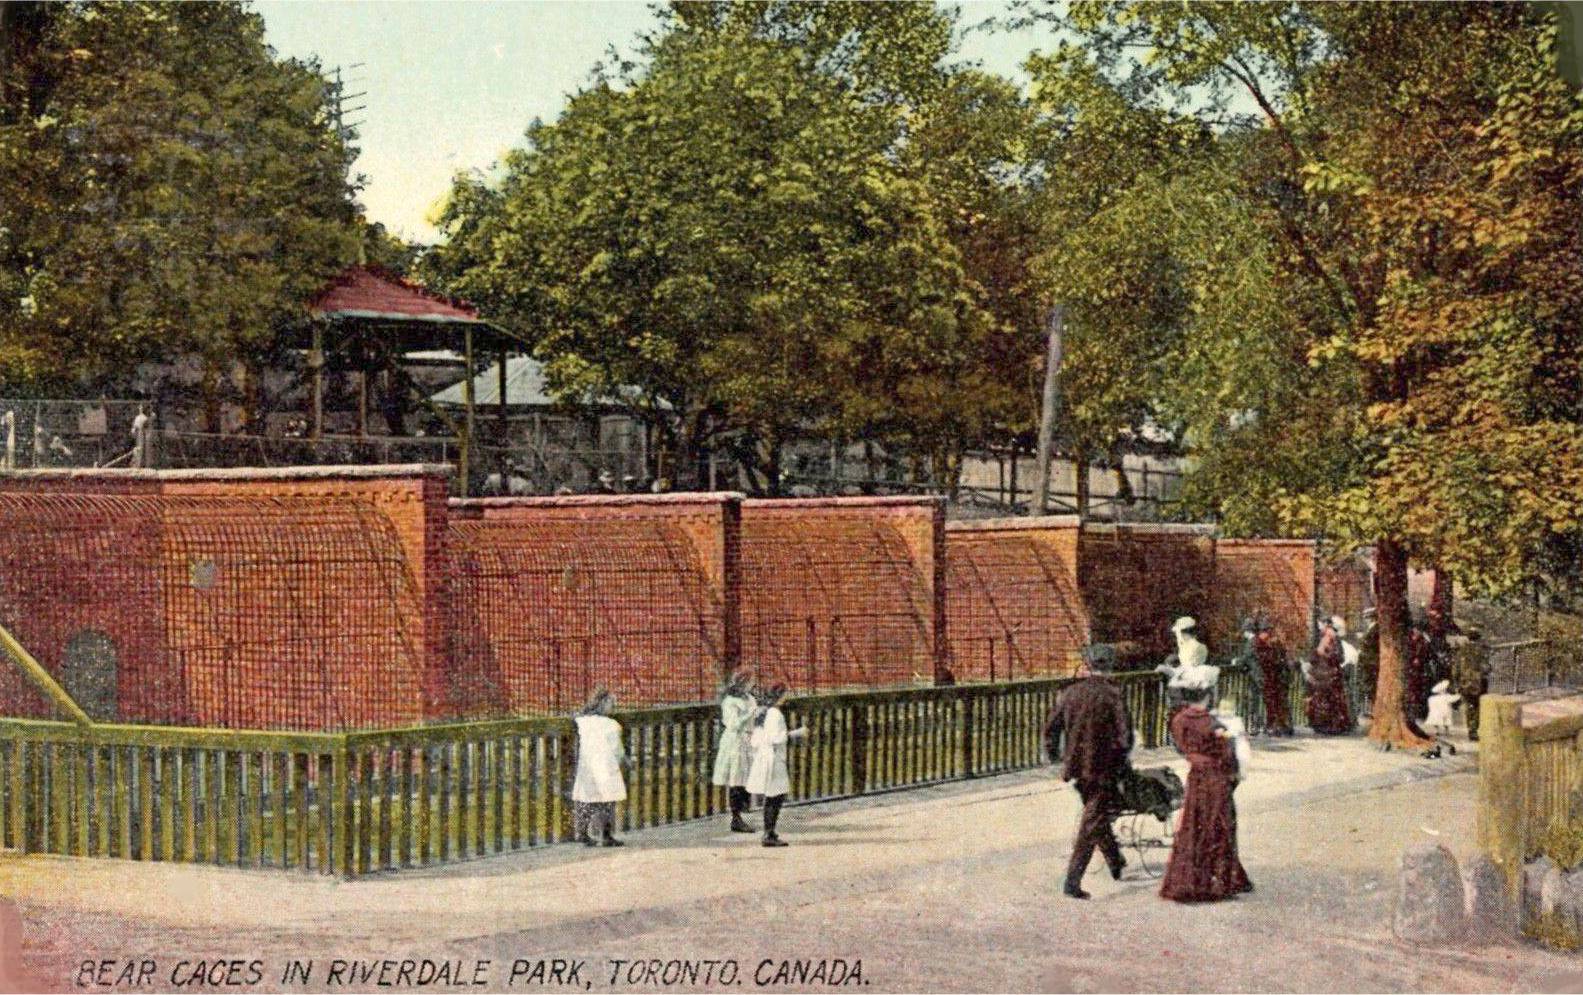 xx postcard - toronto - riverdale zoo - groups of people walking near bear enclosures - 3 little girls featured - couple with baby carriage - tinted - c1910